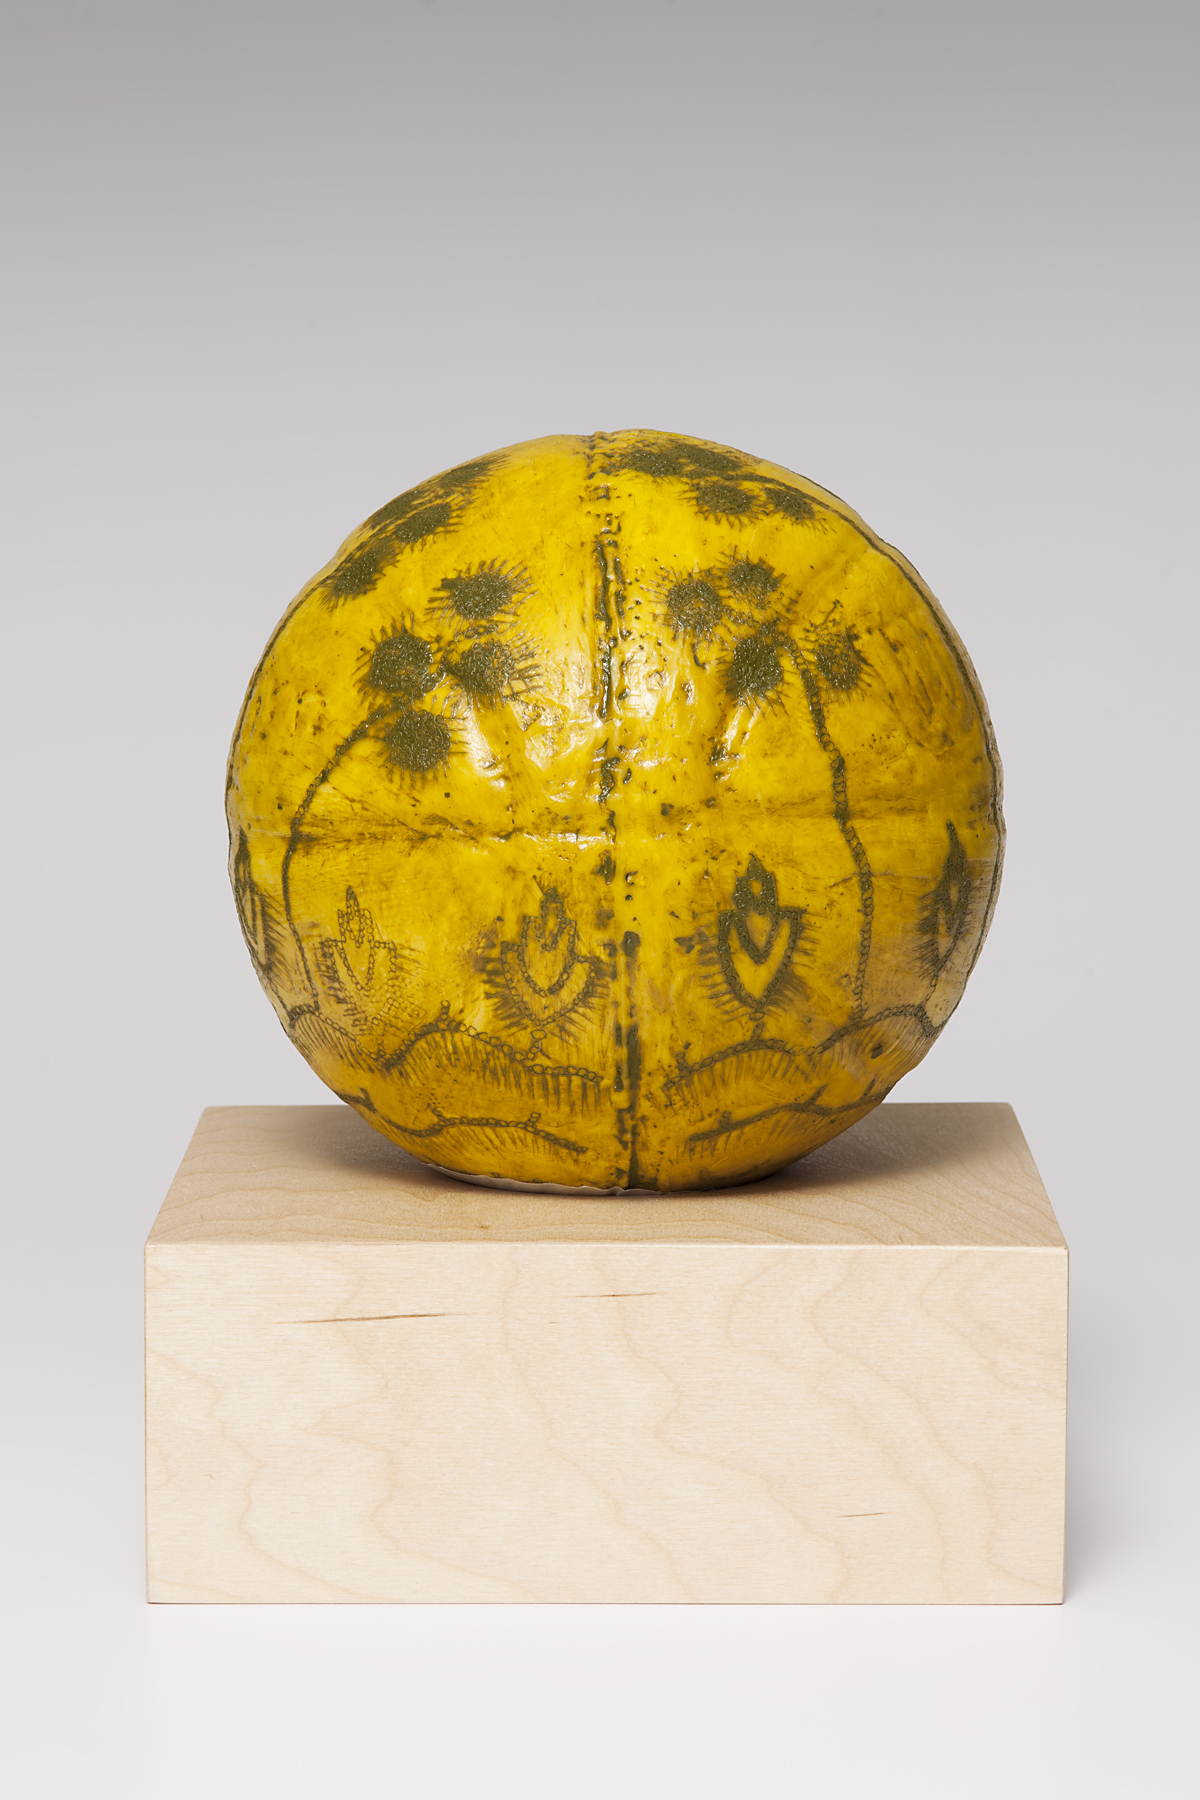 A ceramic sculpture in the shape of a basketball and covered in encaustic. The outlines of the basketball are visible, as well as the logo "Wilson" on the sides. The color is dark yellow and the surface is decorated with lines made up of small circles pressed into the surface, then rubbed with greenish brown pigment. Near the bottom are rows of wavy lines. Extending from the top wavy line is a row of short, tulip shaped flowers alternating with very long stems that reach to the top third of the ball and are